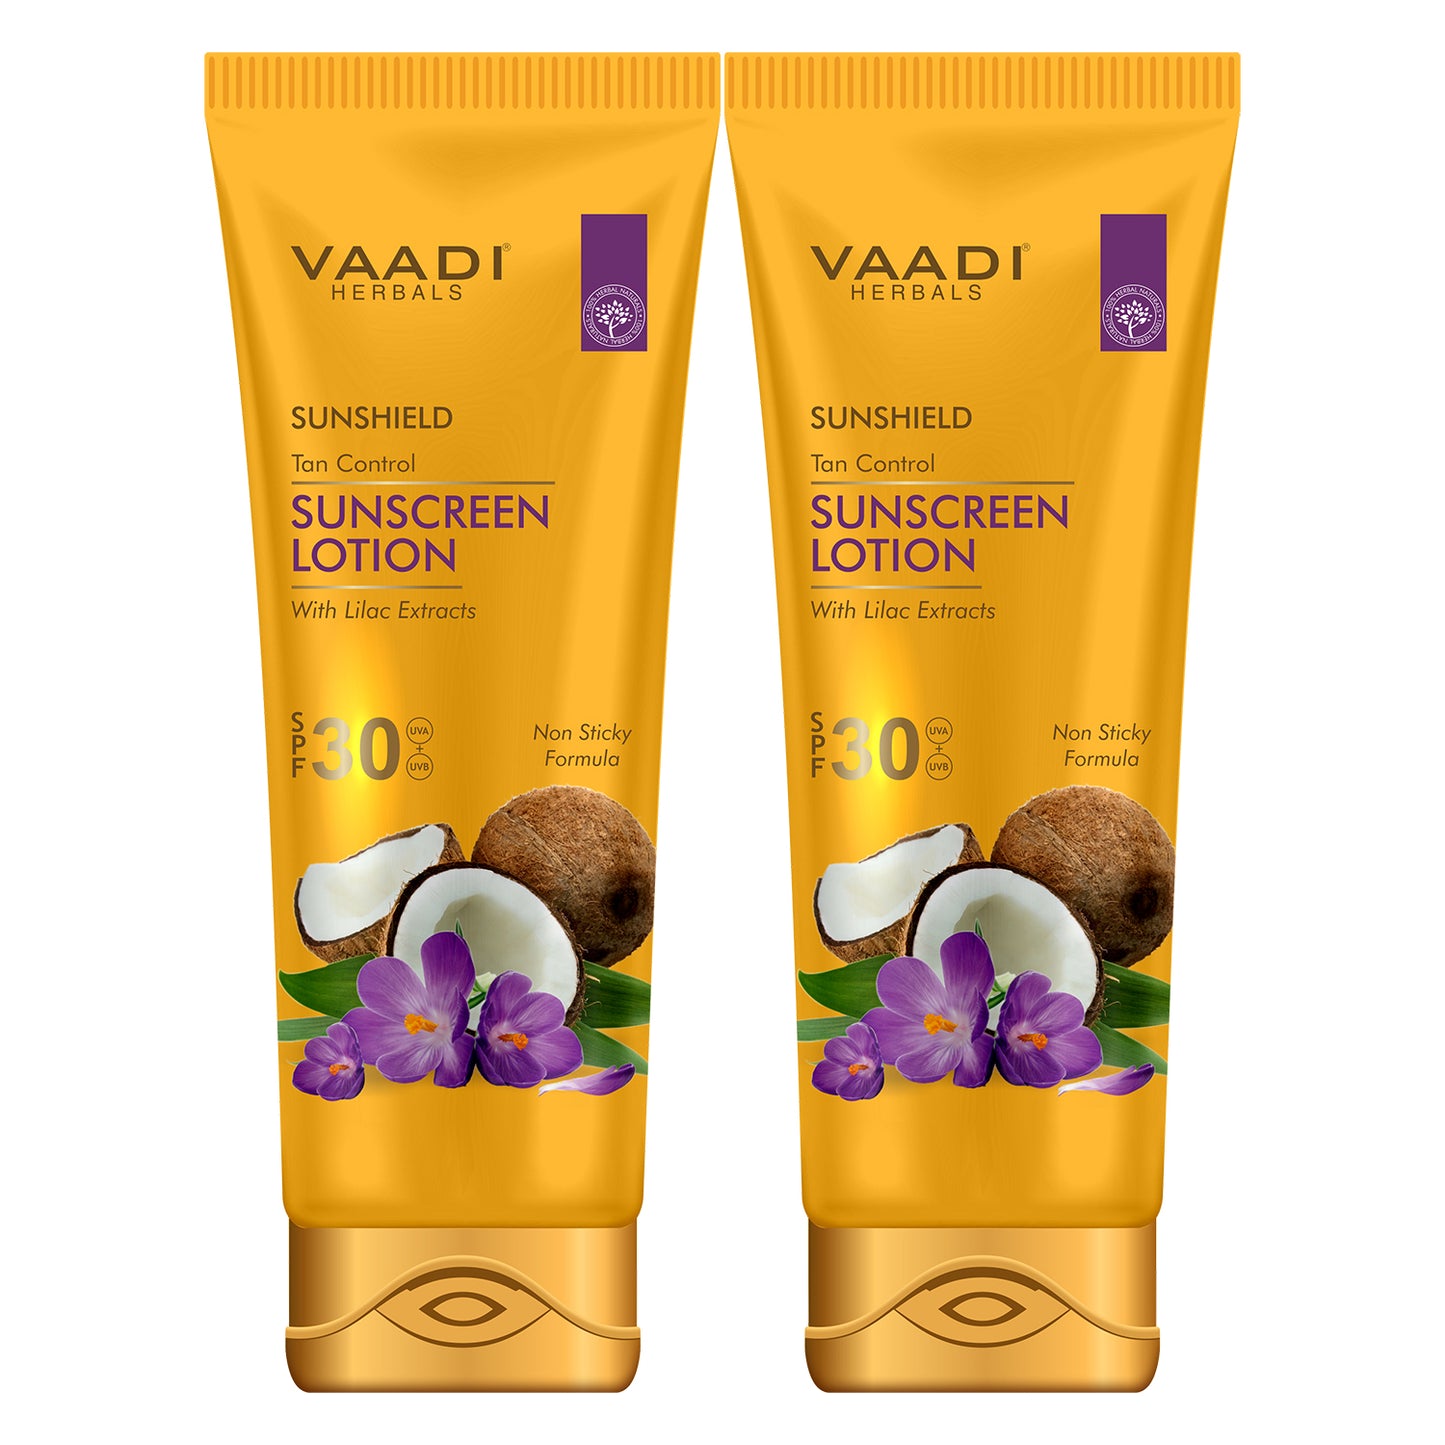 Organic Sunscreen Lotion SPF 30 wth Lilac Extract - Anti oxidant Rich - Long Lasting - Protects from Sun Tan (2 x 110 ml / 4 fl oz)